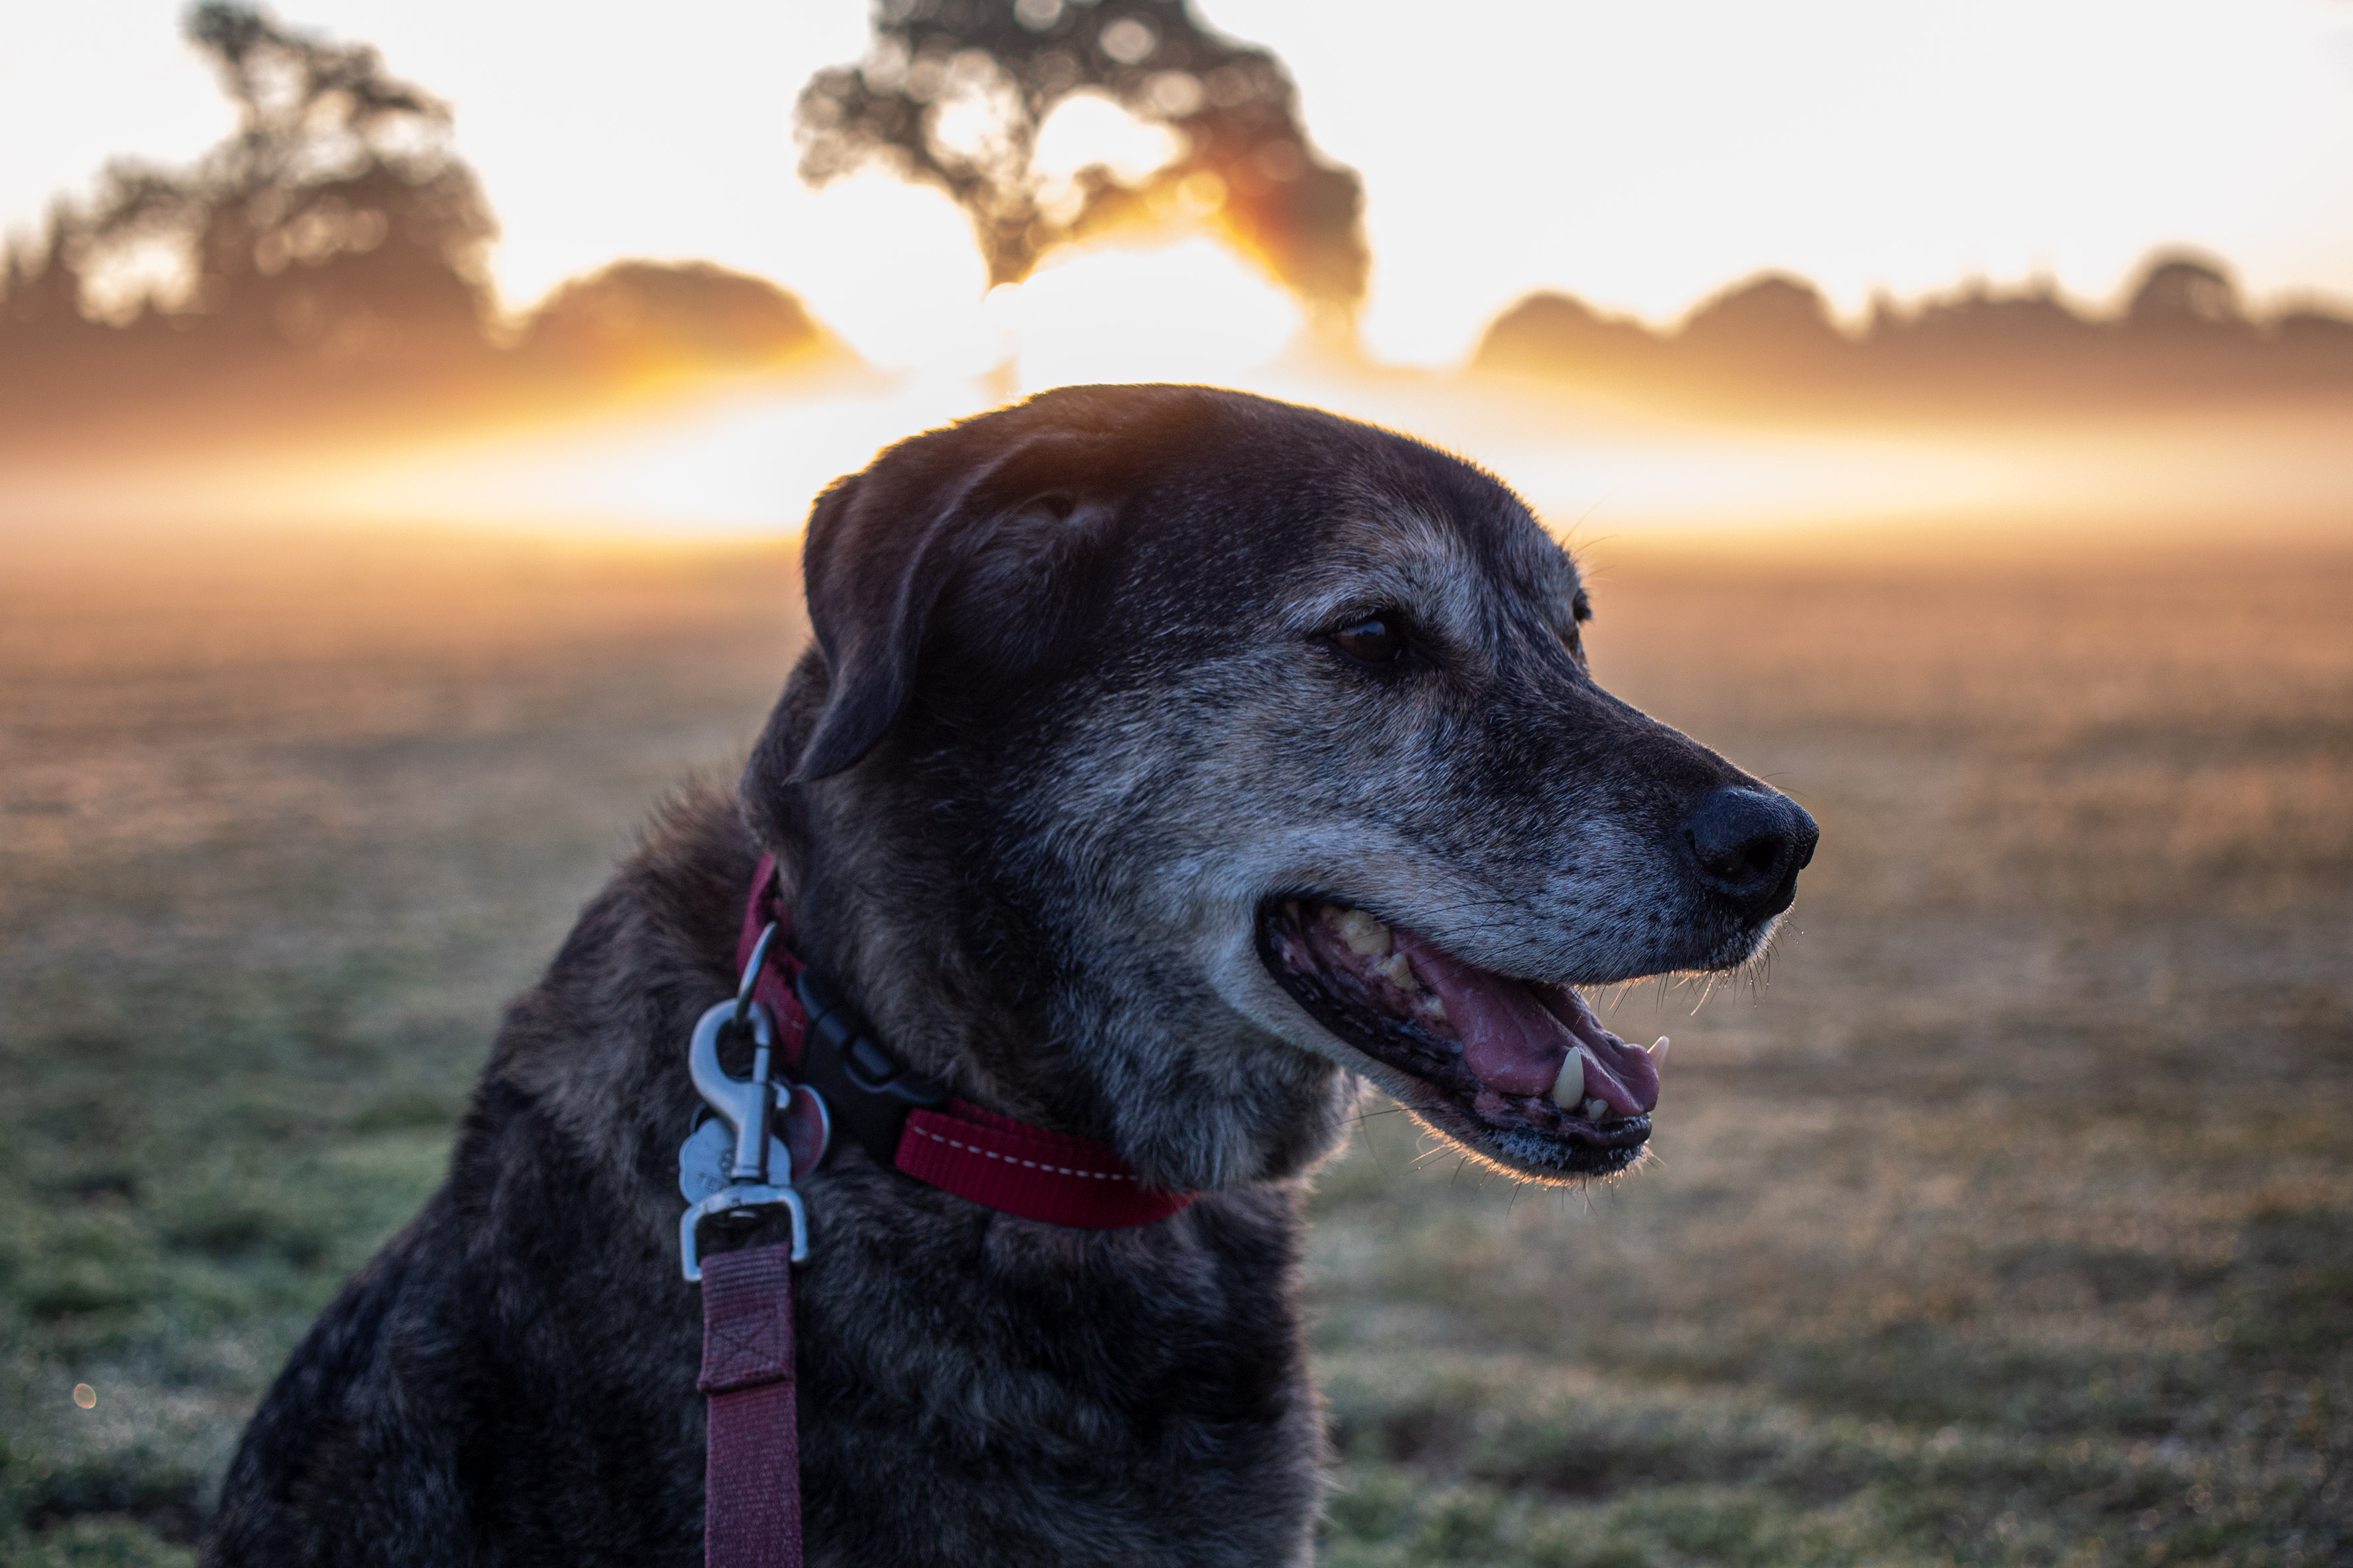 Dog with a red leash and collar in front of a yellow foggy sunrise